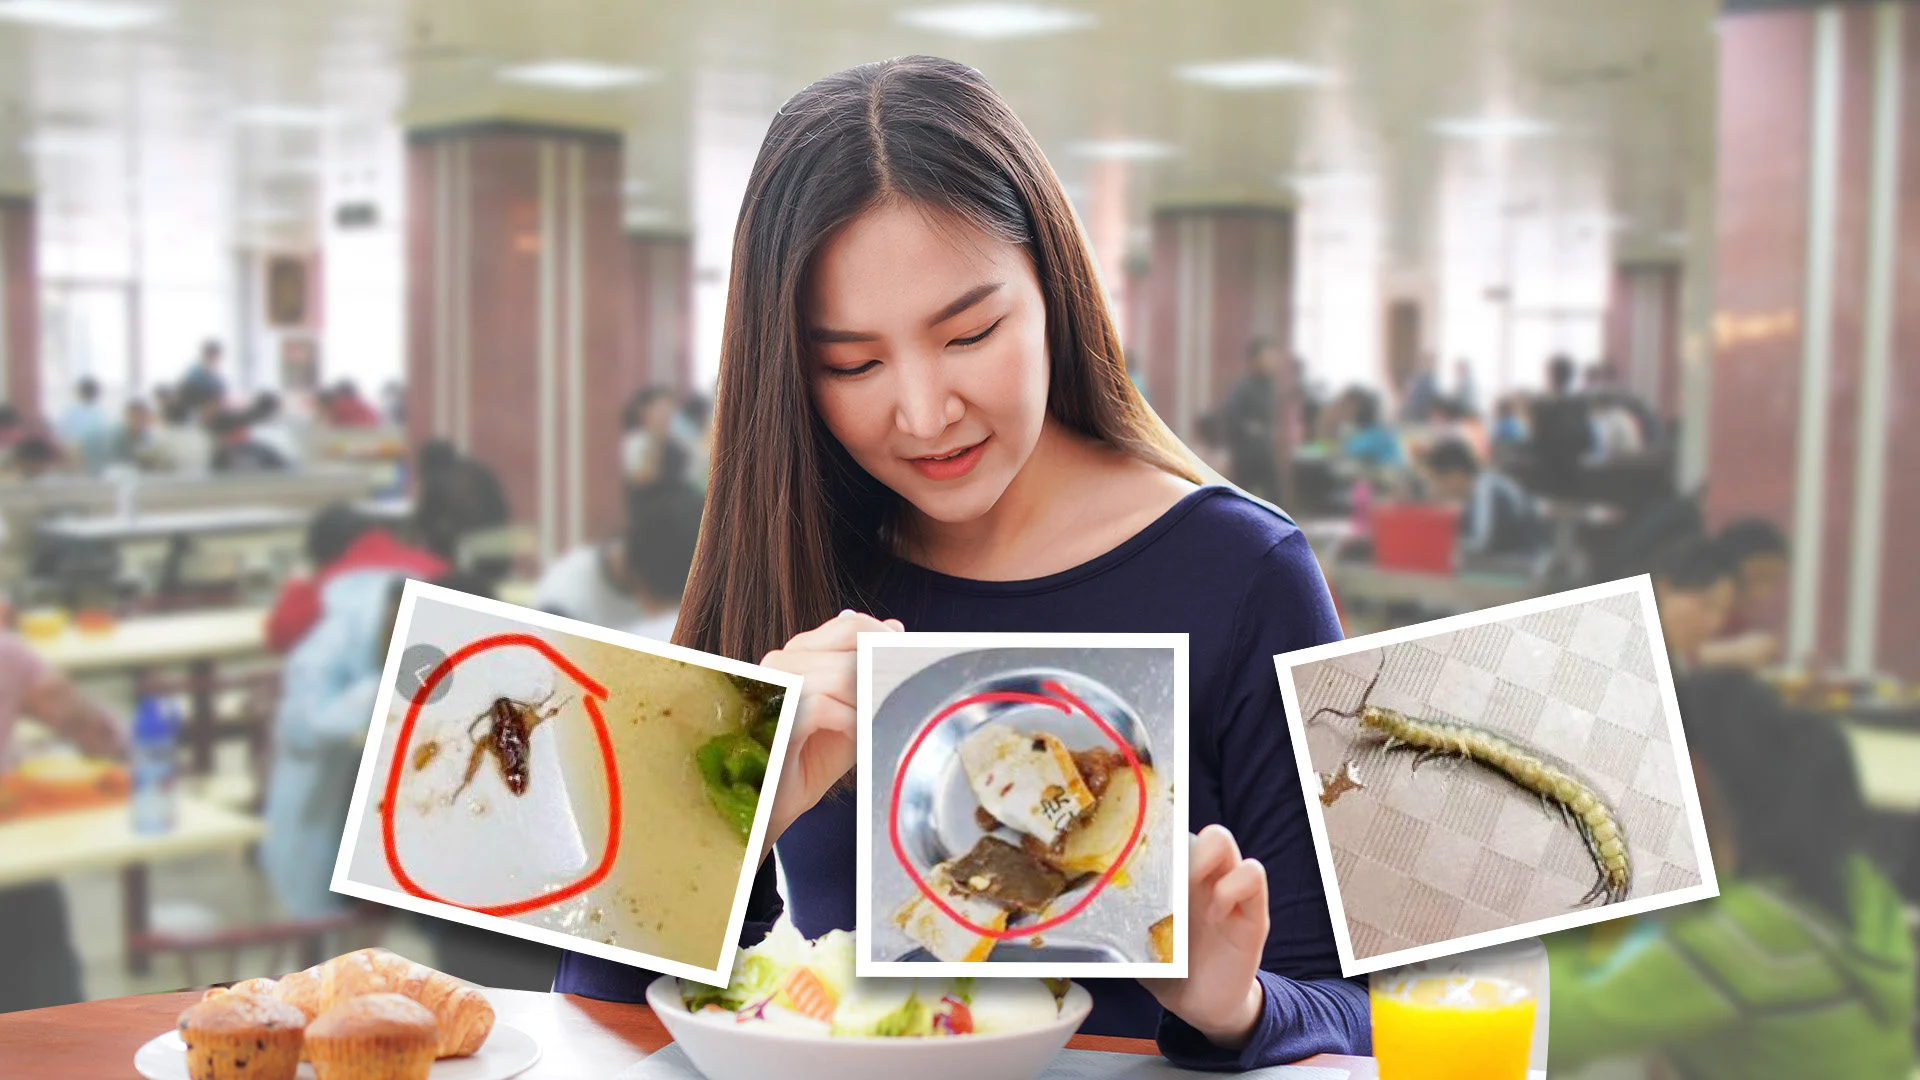 China Culinary Scene: Food Safety and Lawsuits